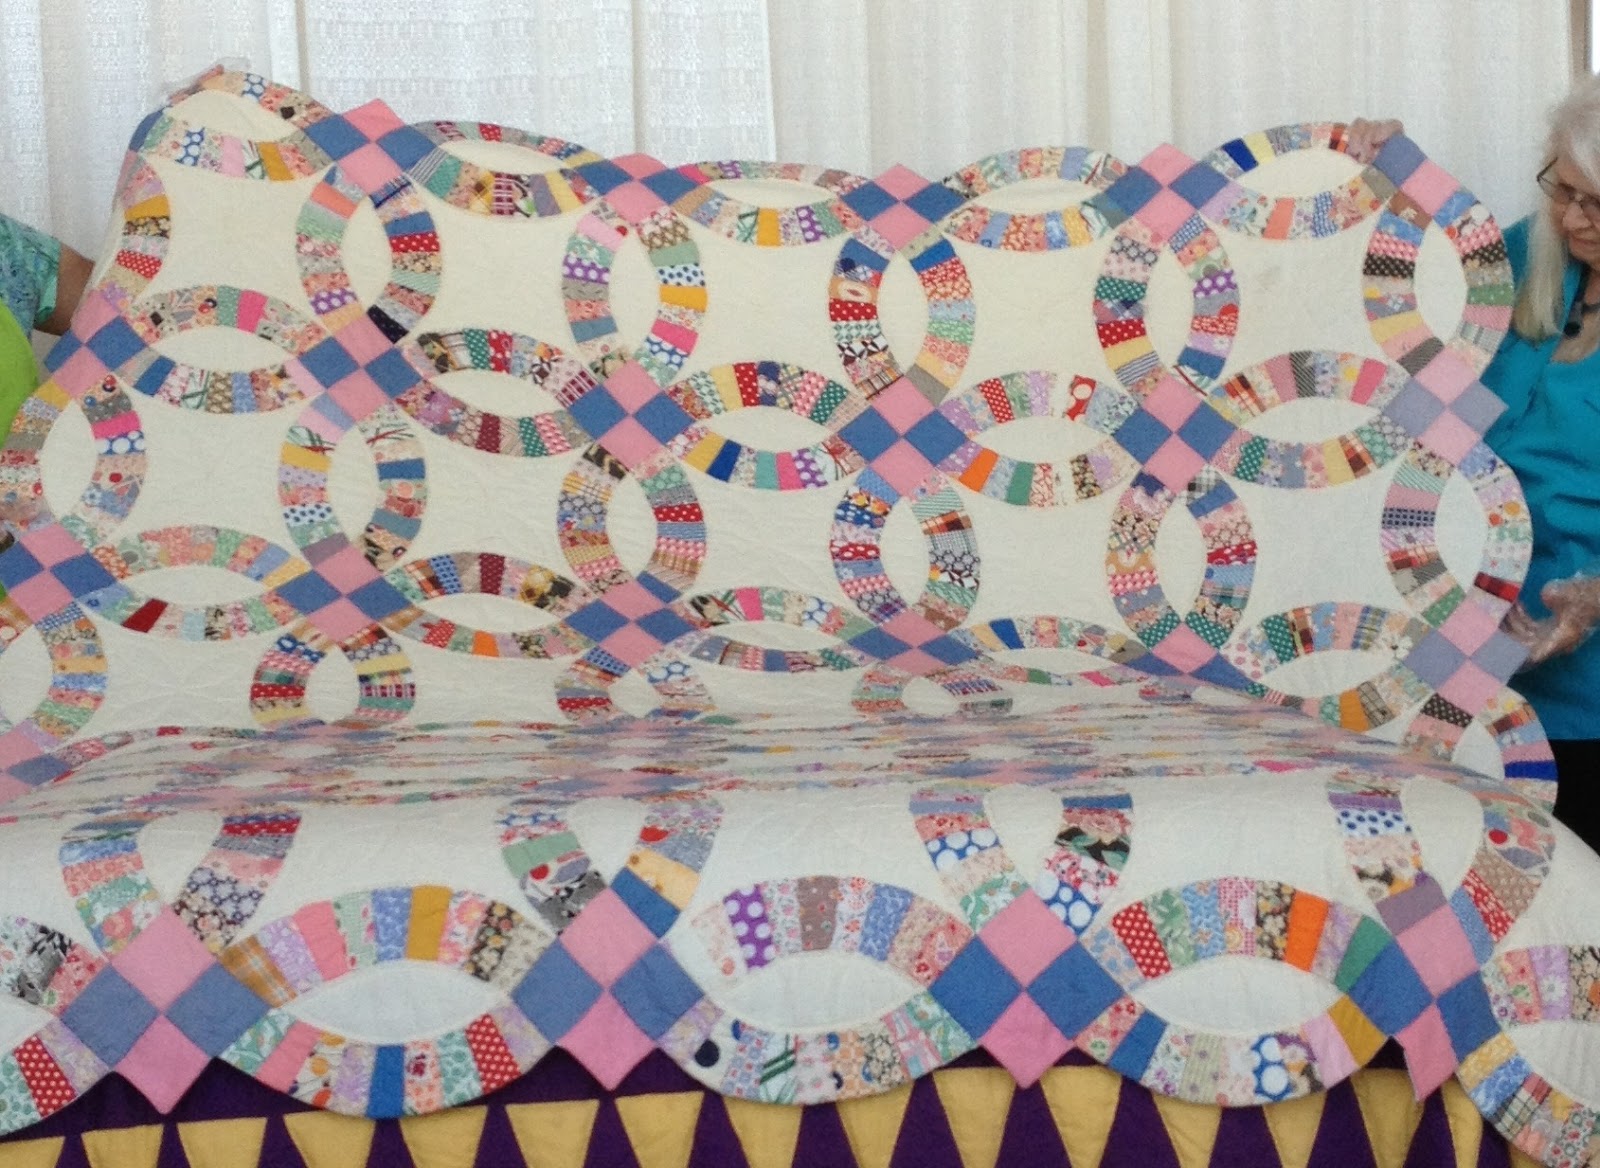 ‘An old-fashioned bed turning’ quilt presentation at Pawnee Bill Ranch